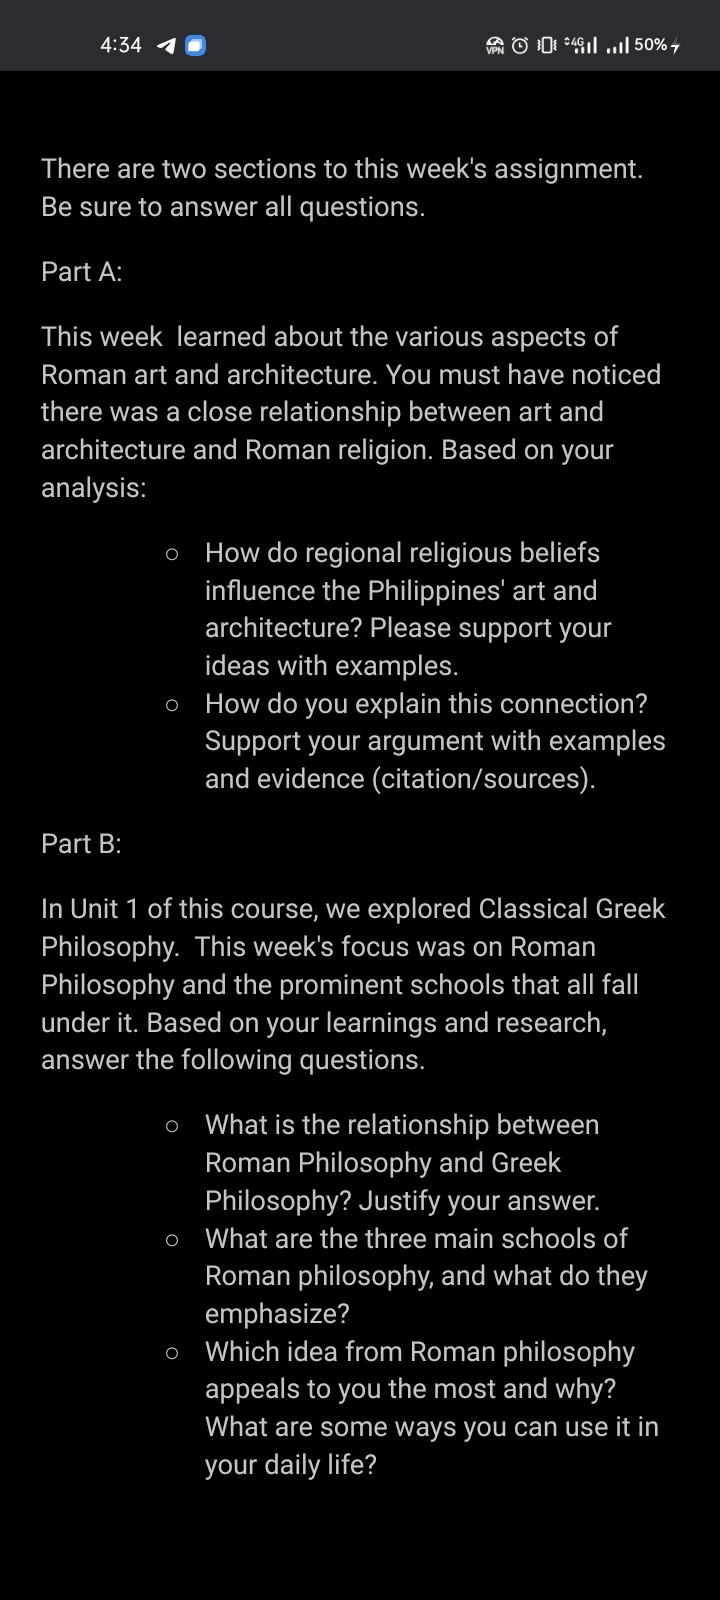 4:34 1
There are two sections to this week's assignment.
Be sure to answer all questions.
Part A:
This week learned about the various aspects of
Roman art and architecture. You must have noticed
there was a close relationship between art and
architecture and Roman religion. Based on your
analysis:
Part B:
4.50%7
O How do regional religious beliefs
influence the Philippines' art and
architecture? Please support your
ideas with examples.
o How do you explain this connection?
Support your argument with examples
and evidence (citation/sources).
In Unit 1 of this course, we explored Classical Greek
Philosophy. This week's focus was on Roman
Philosophy and the prominent schools that all fall
under it. Based on your learnings and research,
answer the following questions.
O
O
O
What is the relationship between
Roman Philosophy and Greek
Philosophy? Justify your answer.
What are the three main schools of
Roman philosophy, and what do they
emphasize?
Which idea from Roman philosophy
appeals to you the most and why?
What are some ways you can use it in
your daily life?